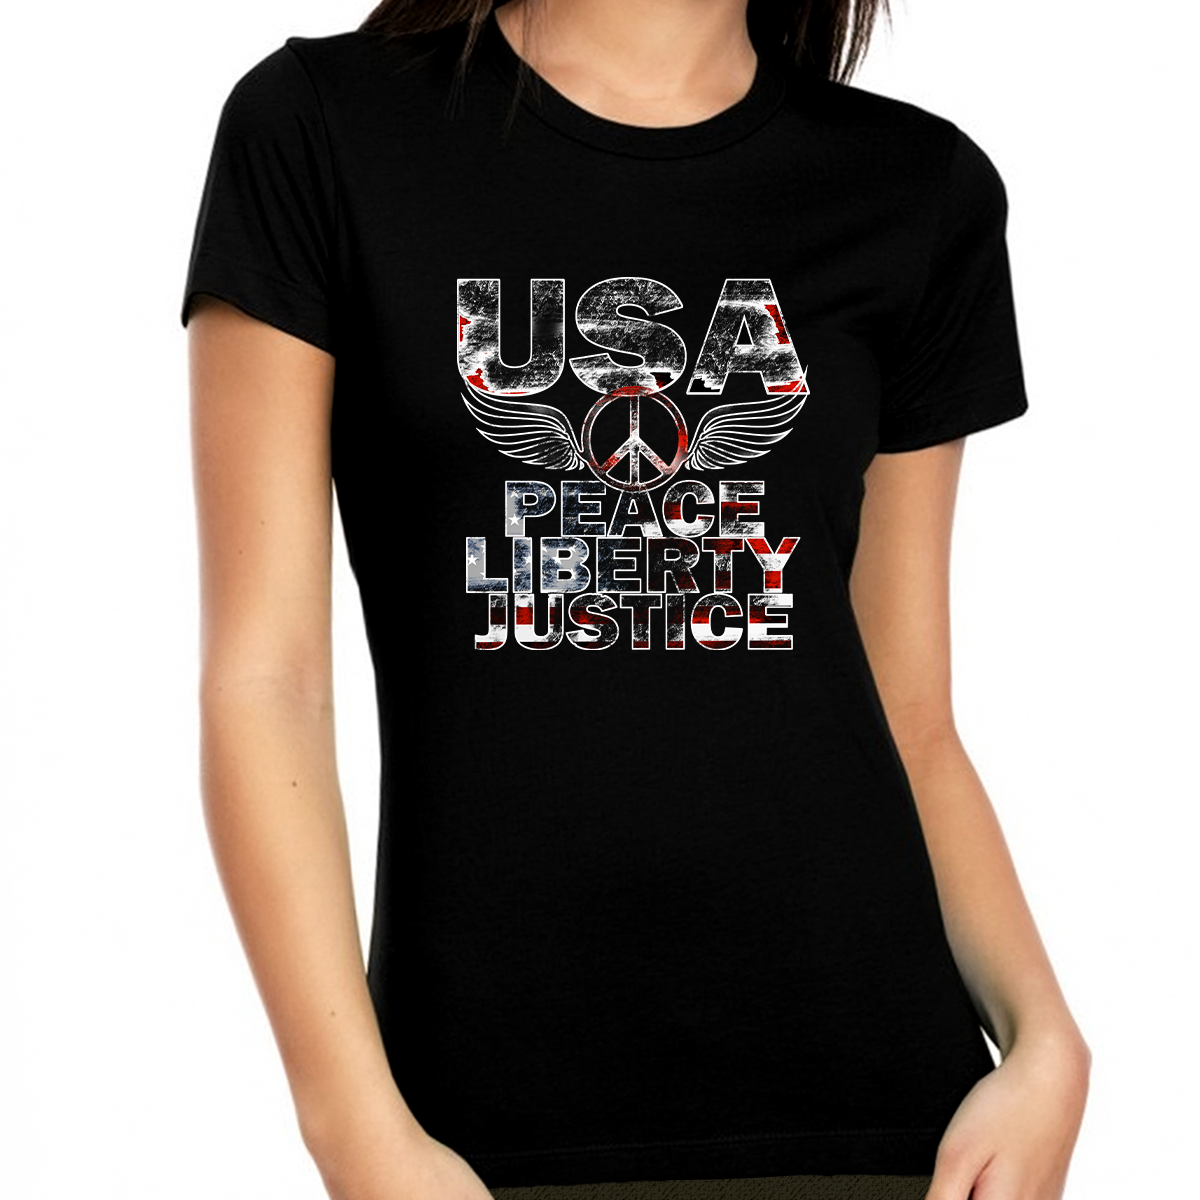 4th of July Shirts for Women Patriotic Shirts for Women Peace Liberty Justice Black American Flag Shirt - Fire Fit Designs